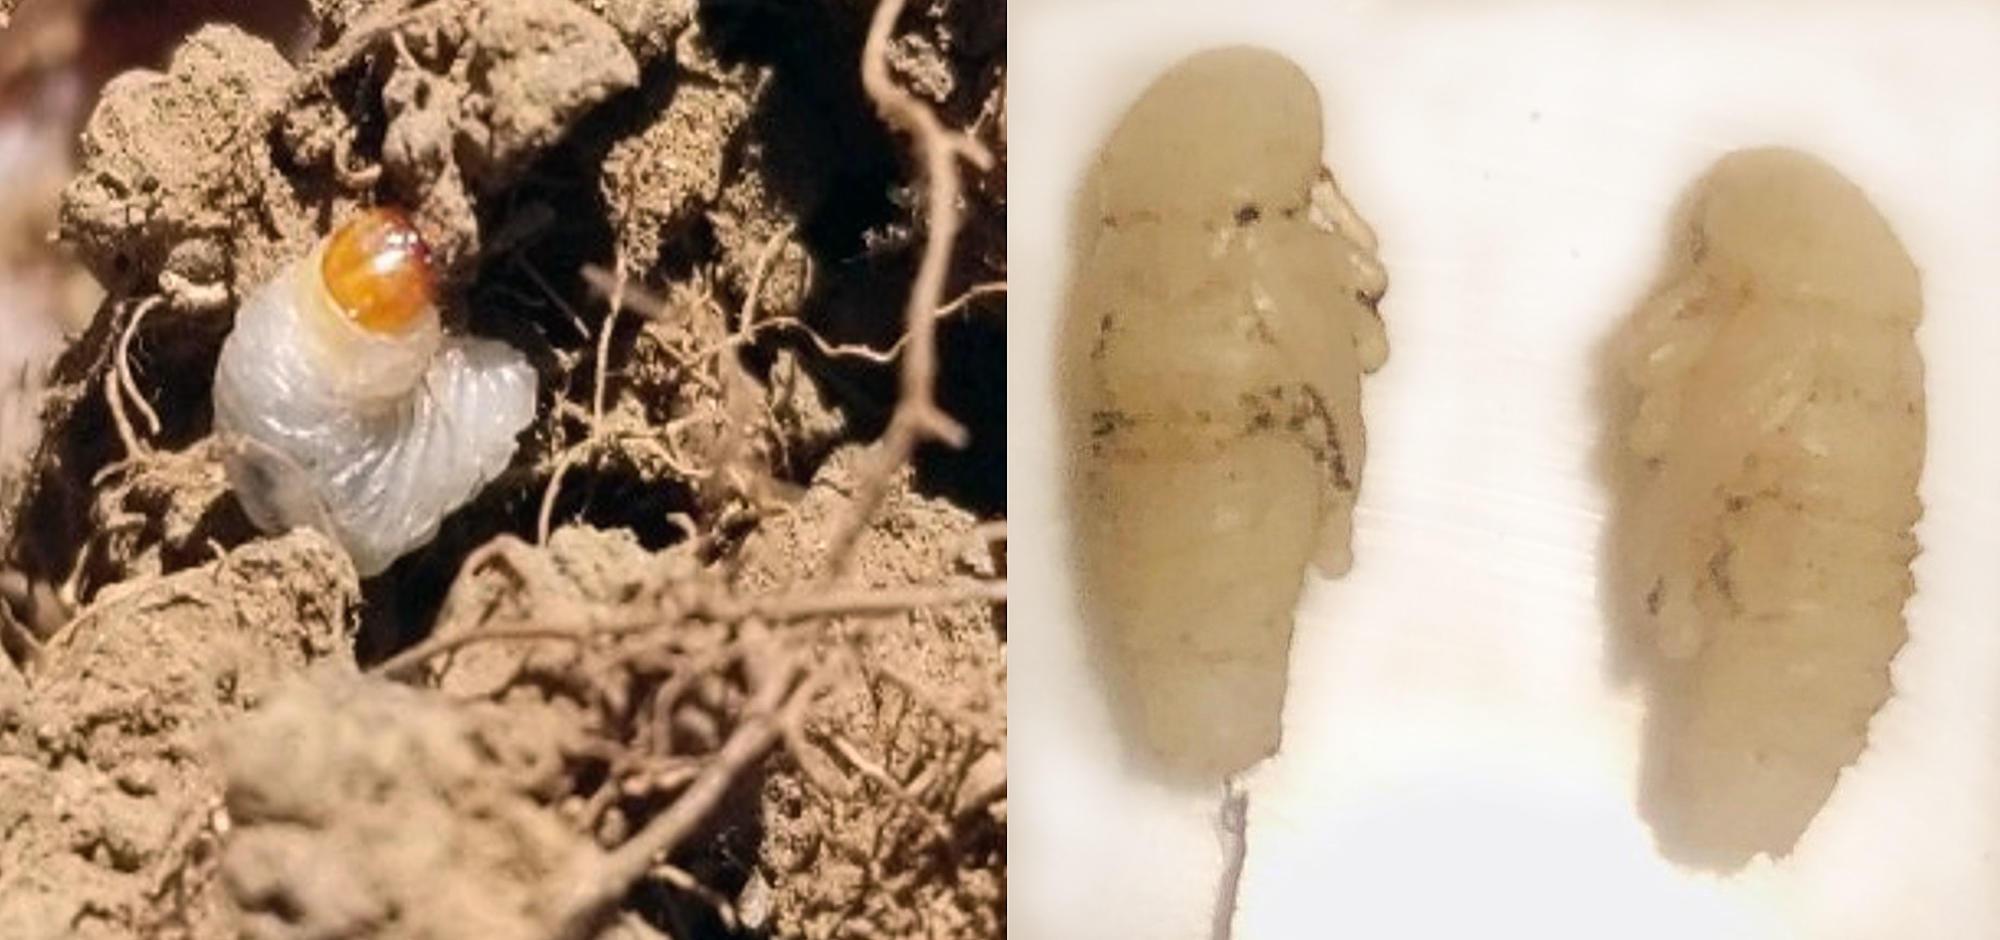 Larvae feeding on roots amid clods of soil (left), and two white pupae (right)